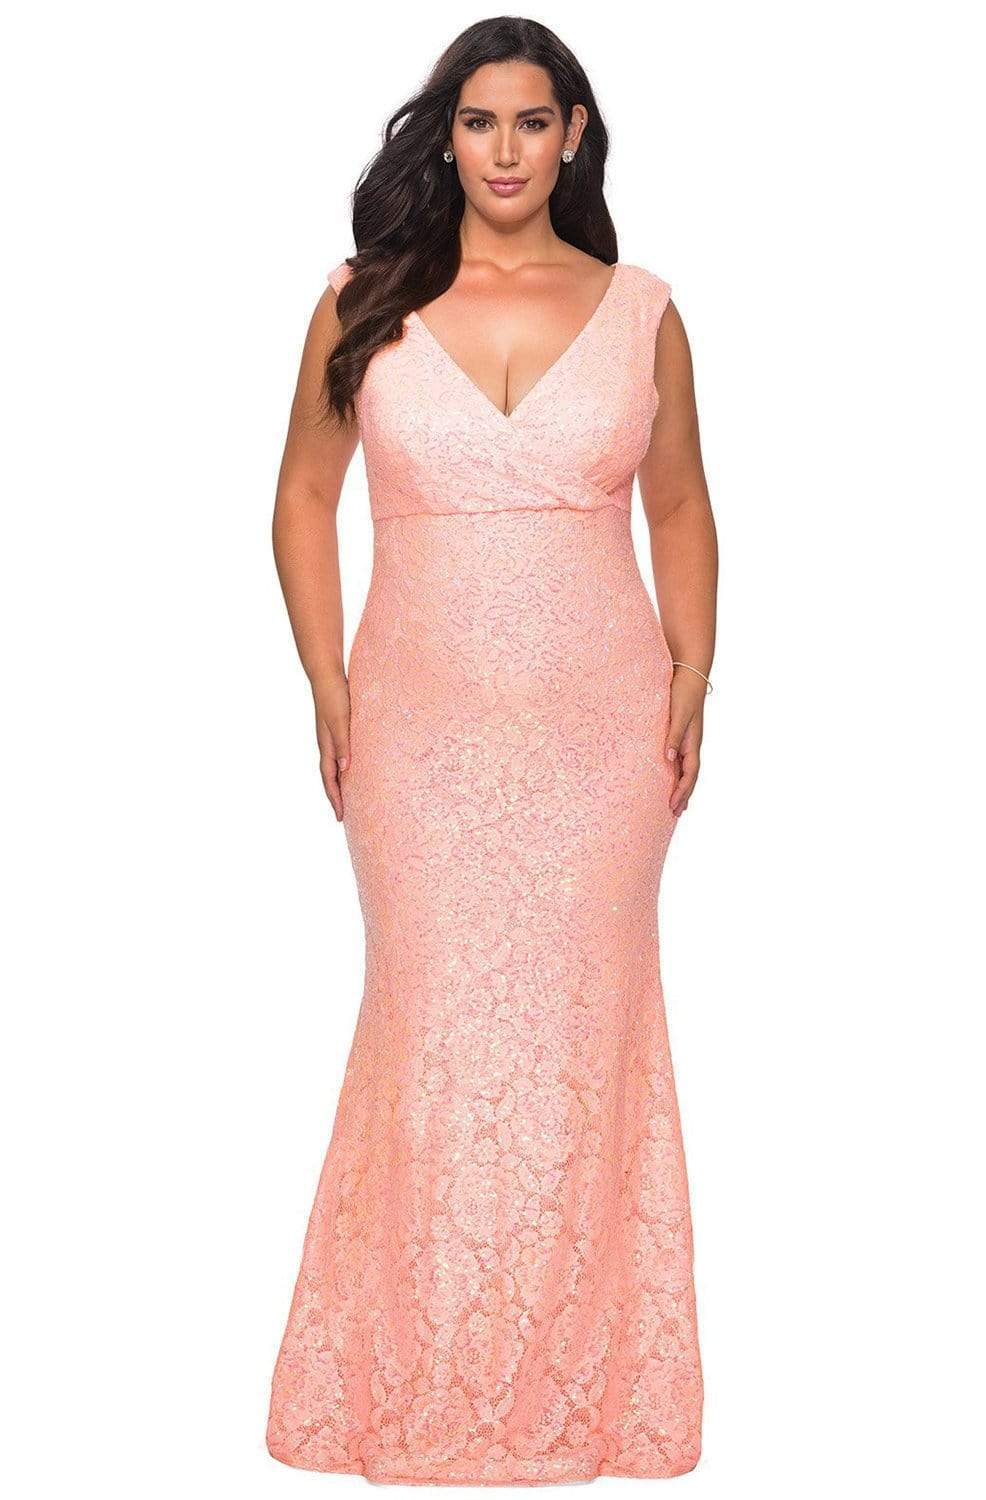 Image of La Femme - 28837 V Neck Rhinestone Beaded Full Lace Simple Prom Gown